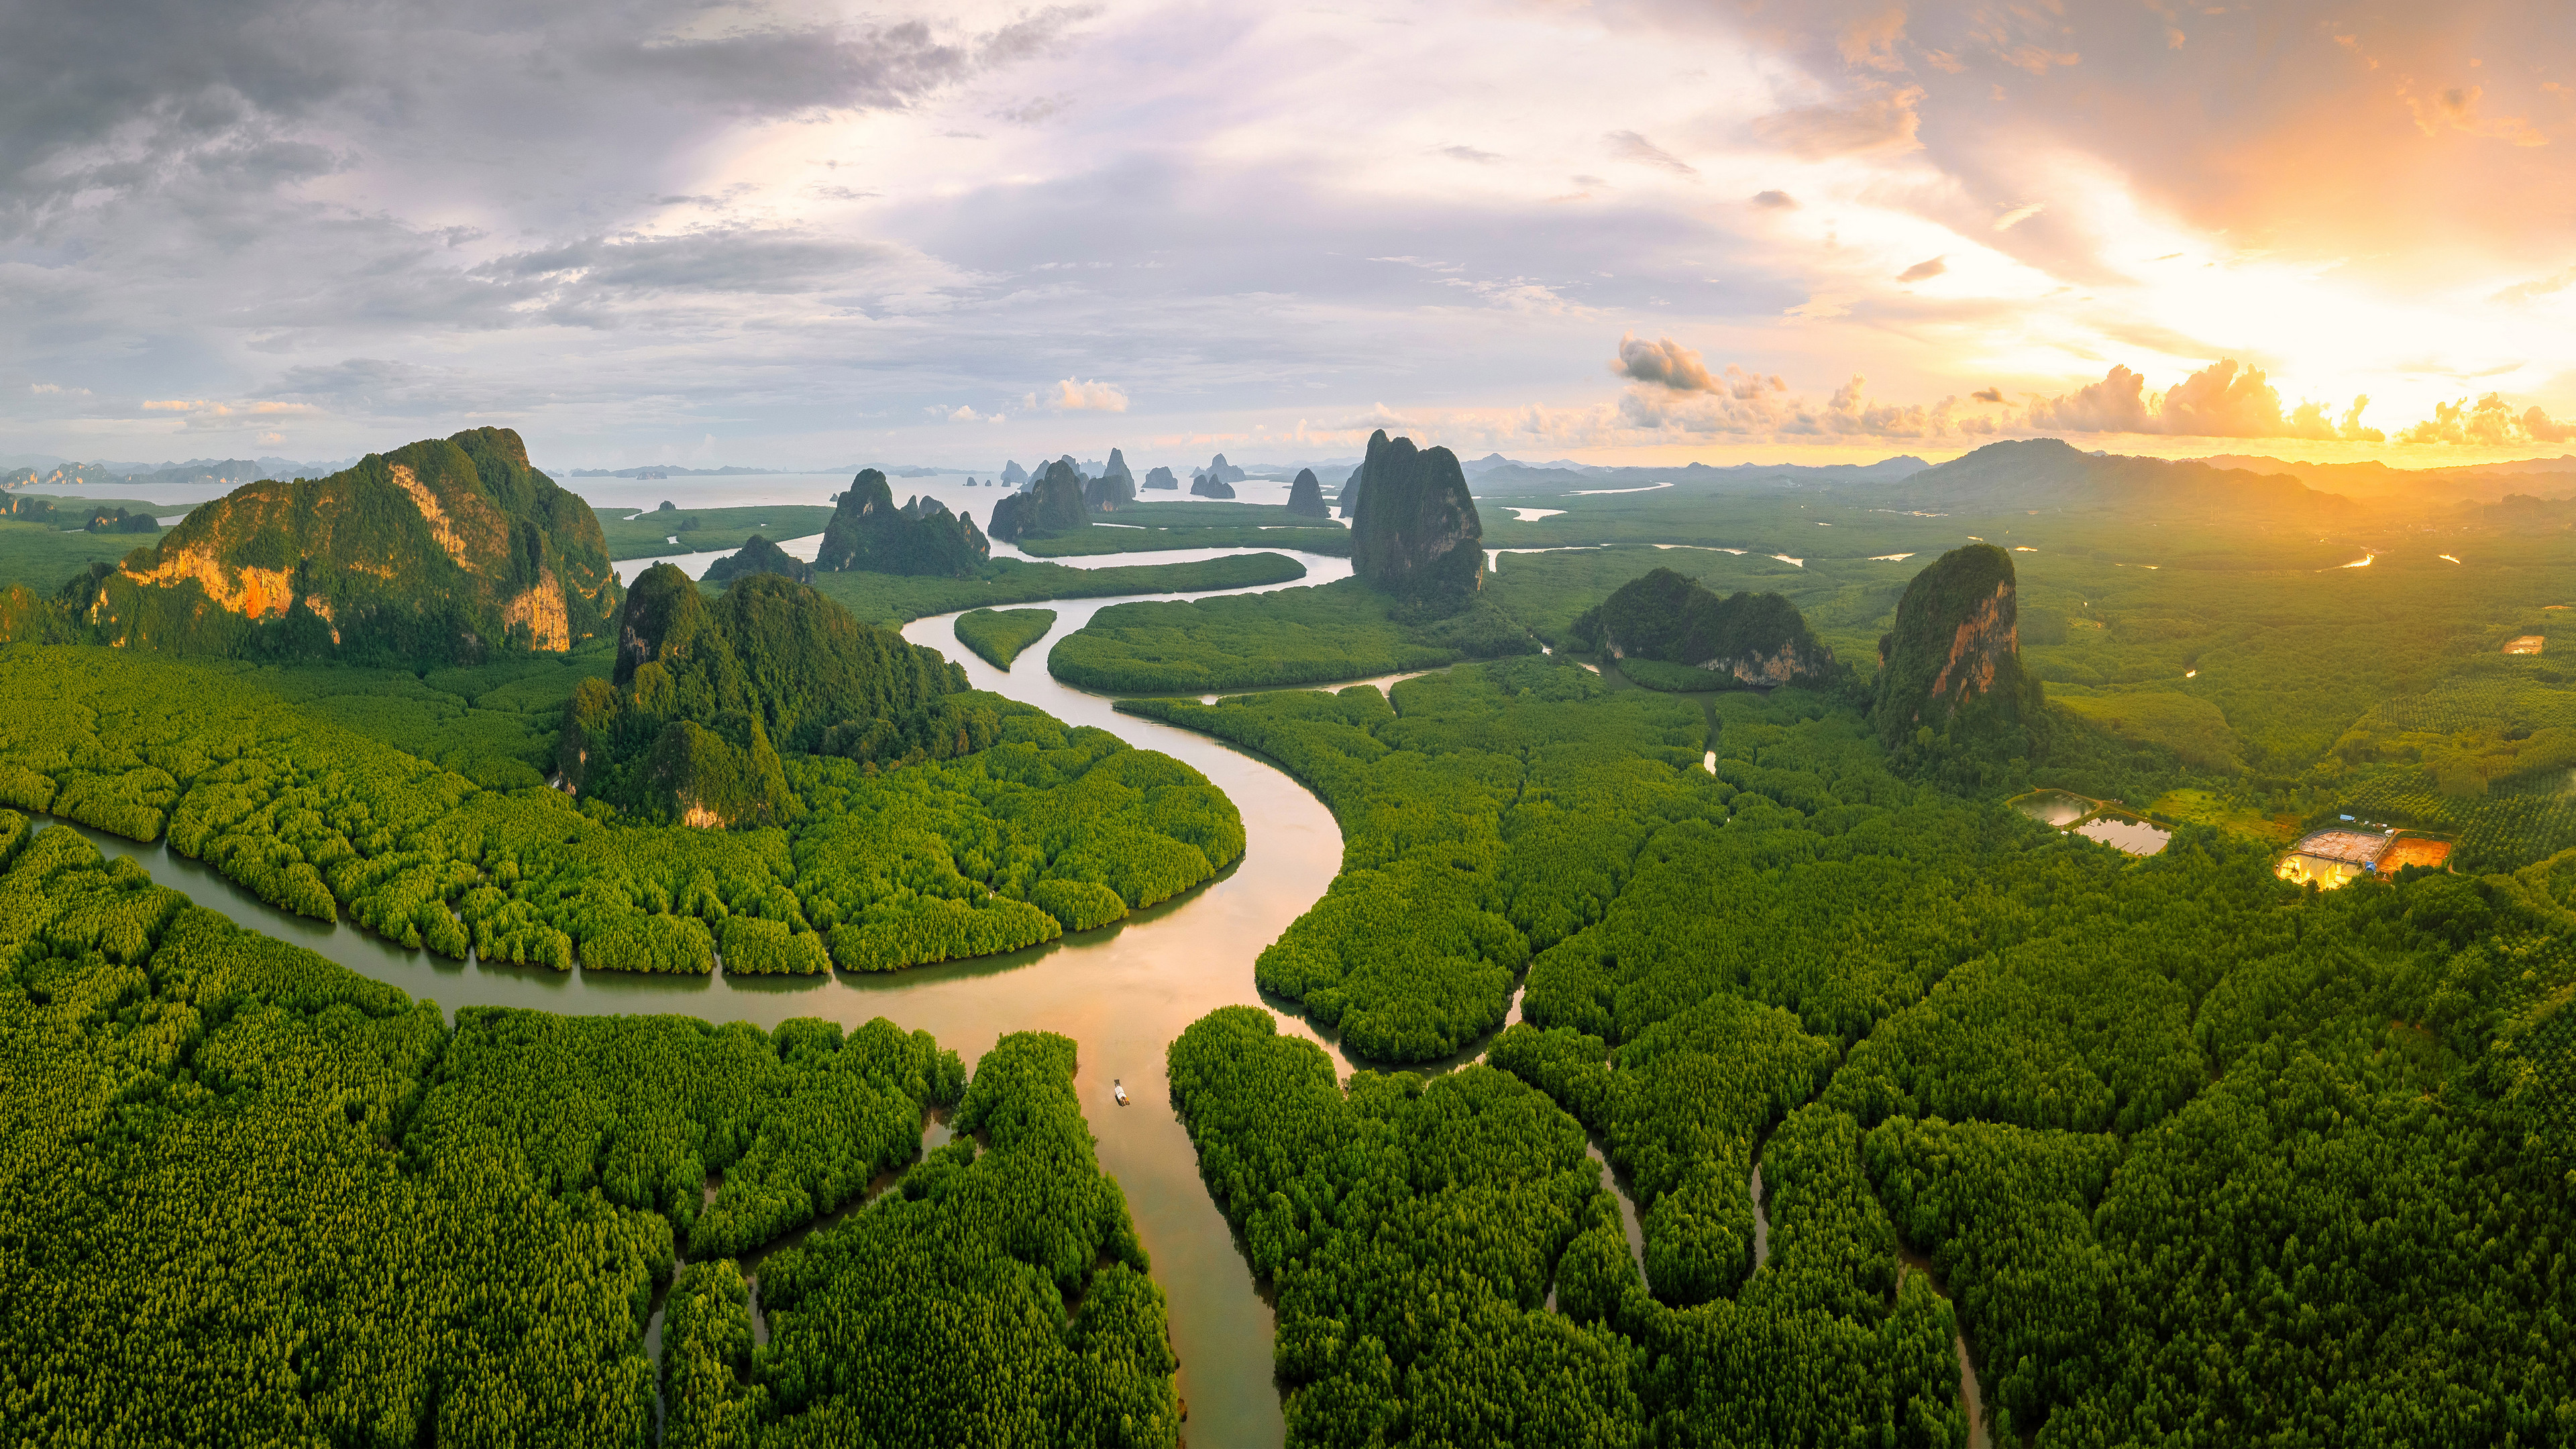 Thailand Landscape Nature River Forest Rocks Mountains Sky Clouds Sunset Aerial View 3840x2160